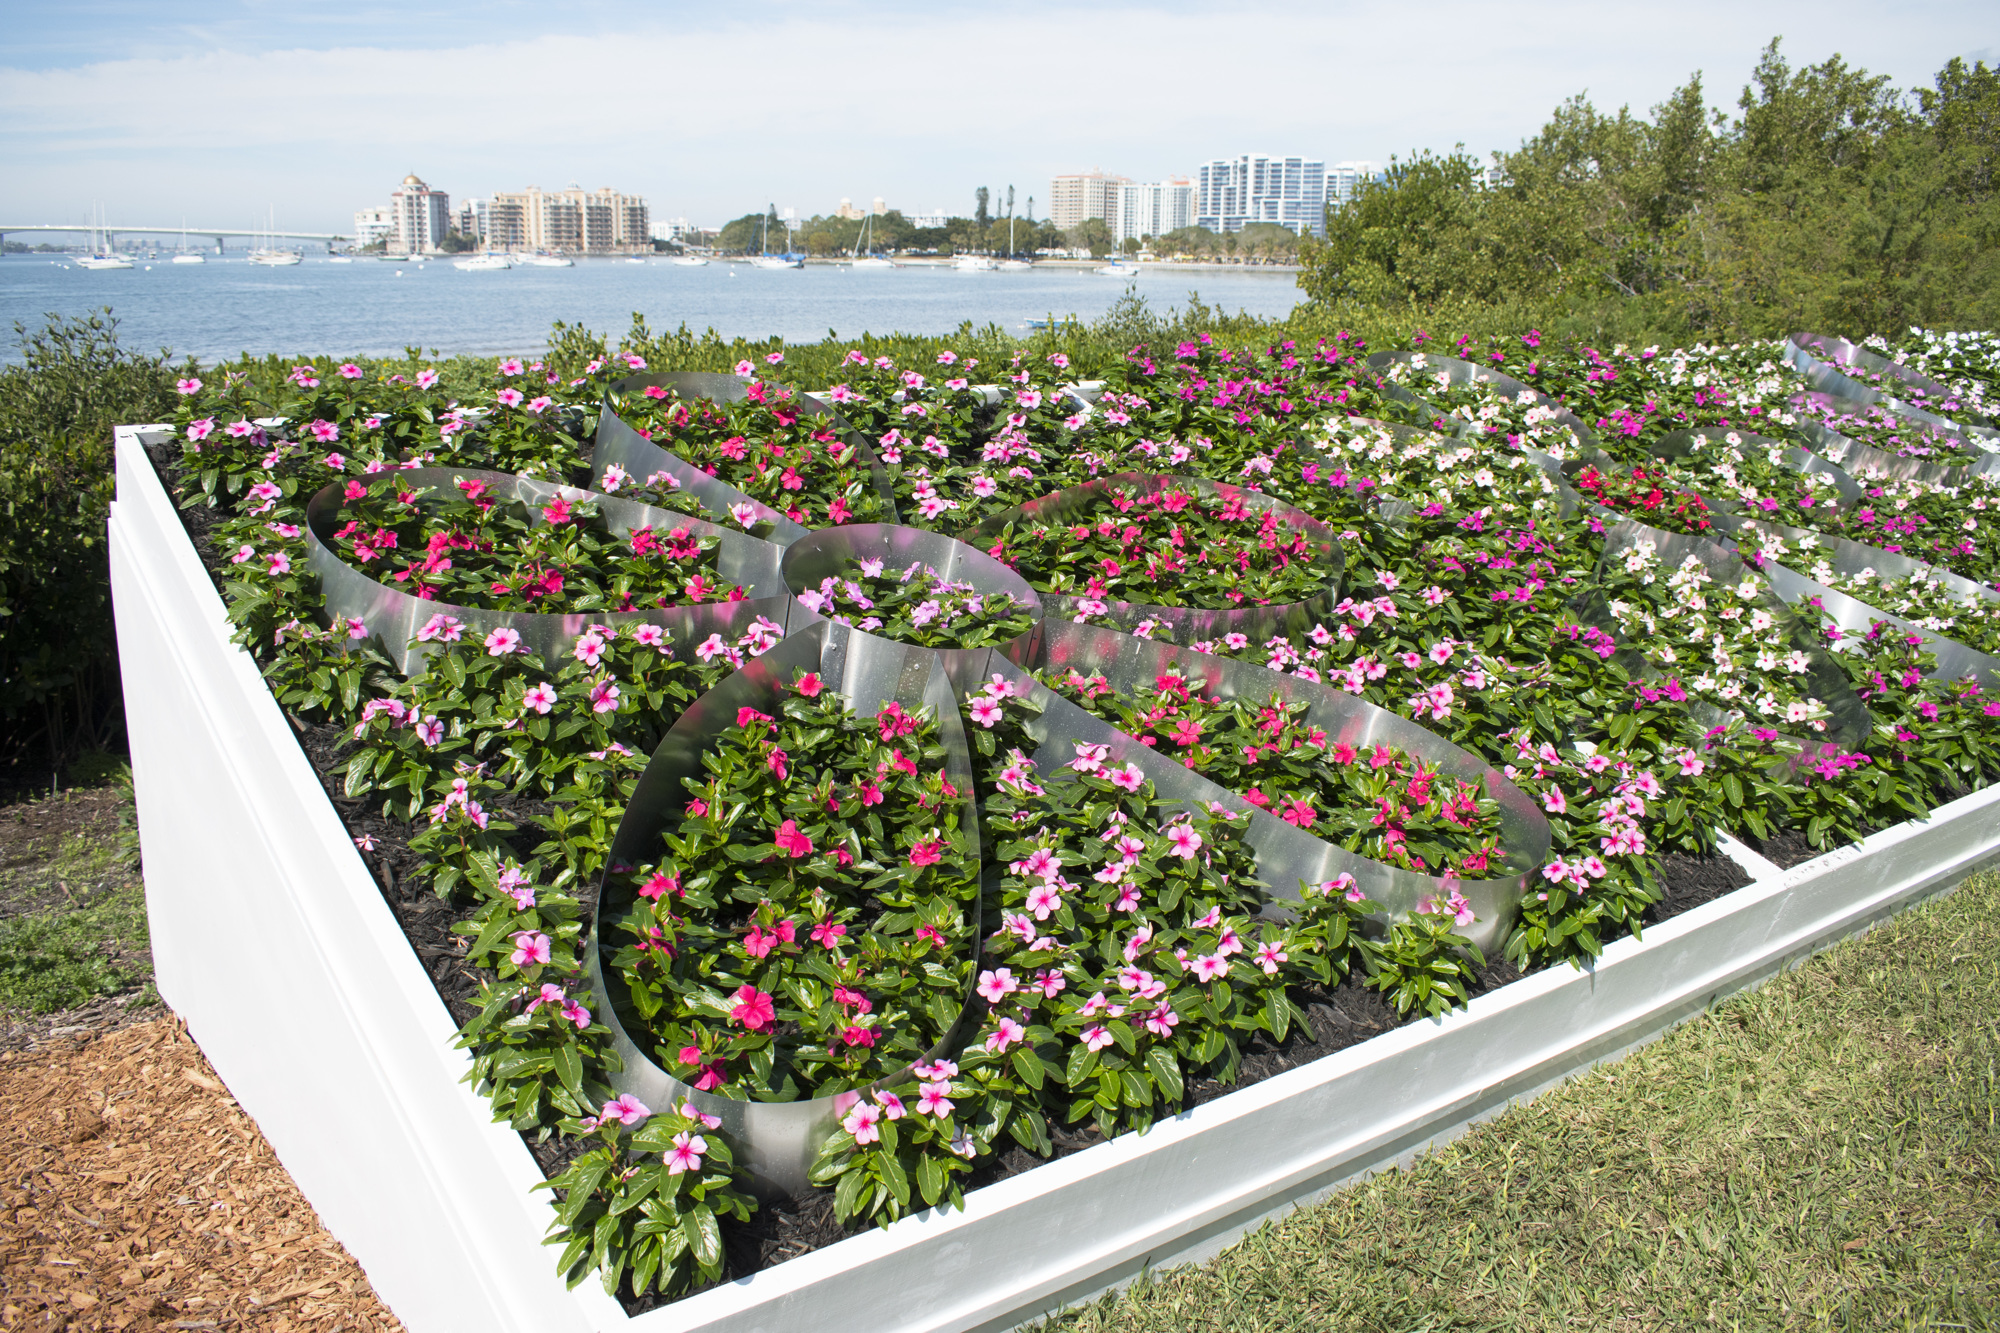 A display of a variety of Madagascar periwinkle are planted in the shape of daisy flowers – an image often featured in Warhol’s work – overlooking Sarasota Bay. Photo by Niki Kottmann